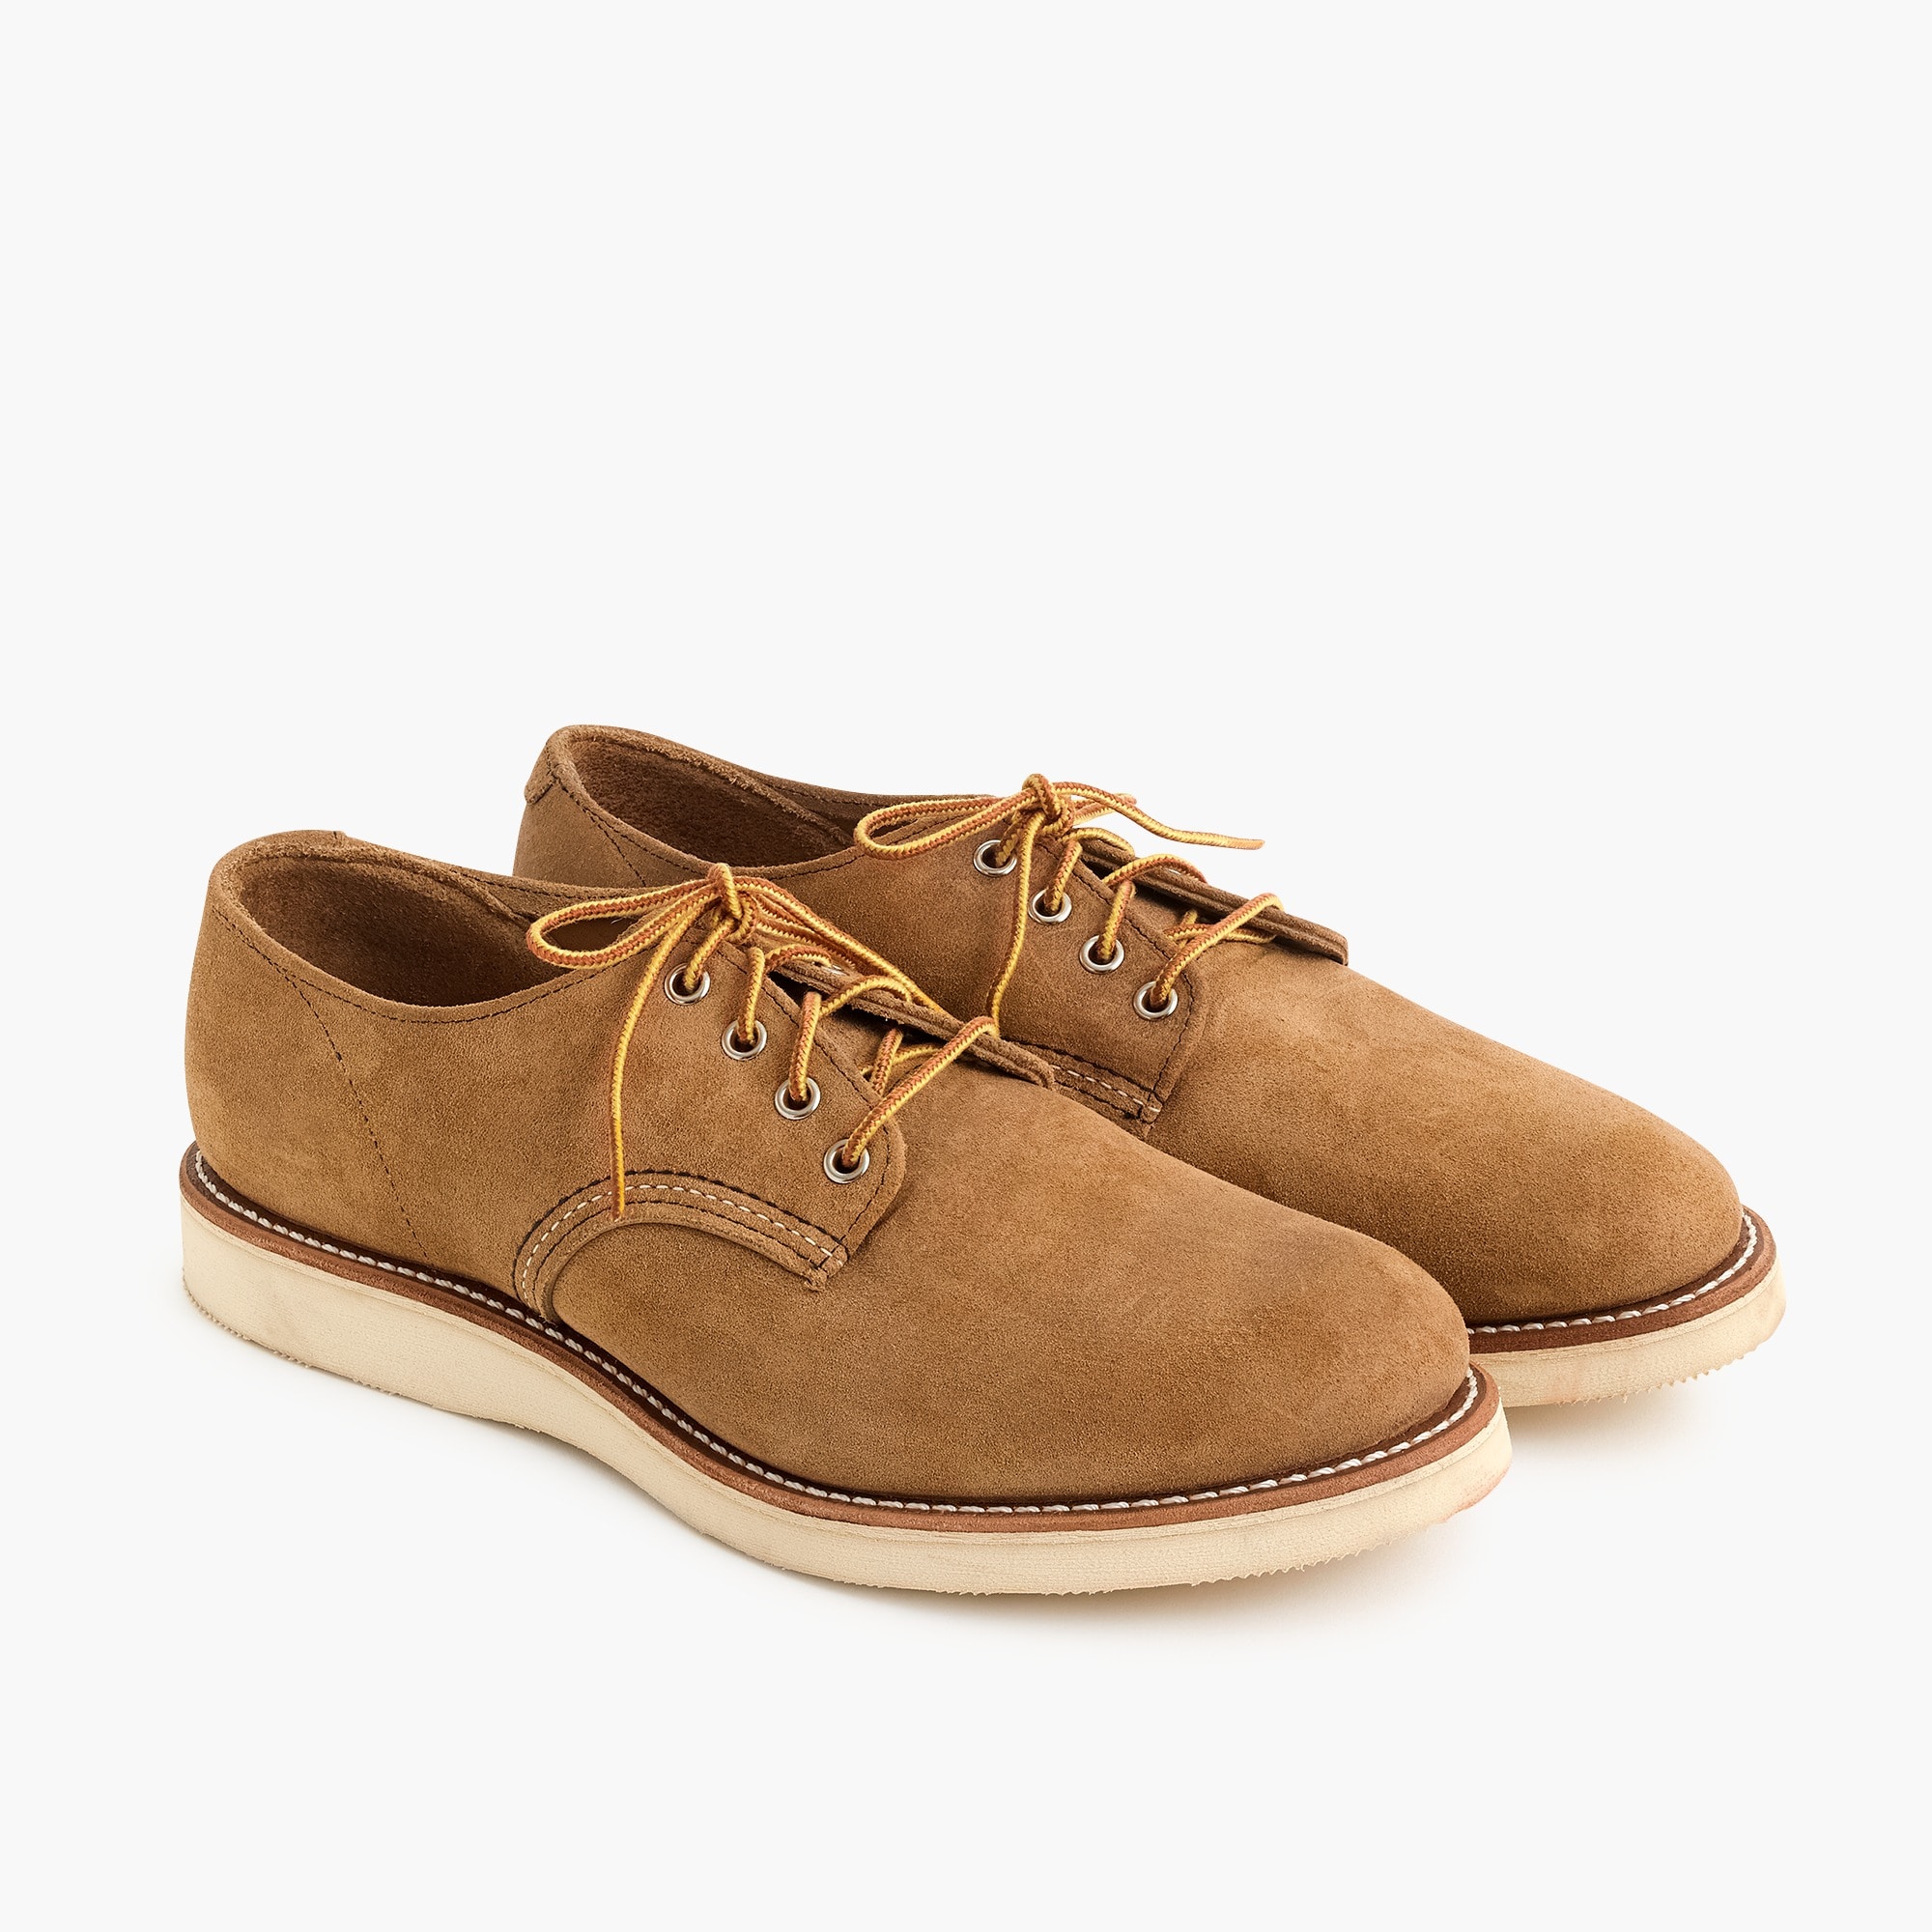 Men's Shoes : Sneakers, Sandals, Loafers & More | J.Crew